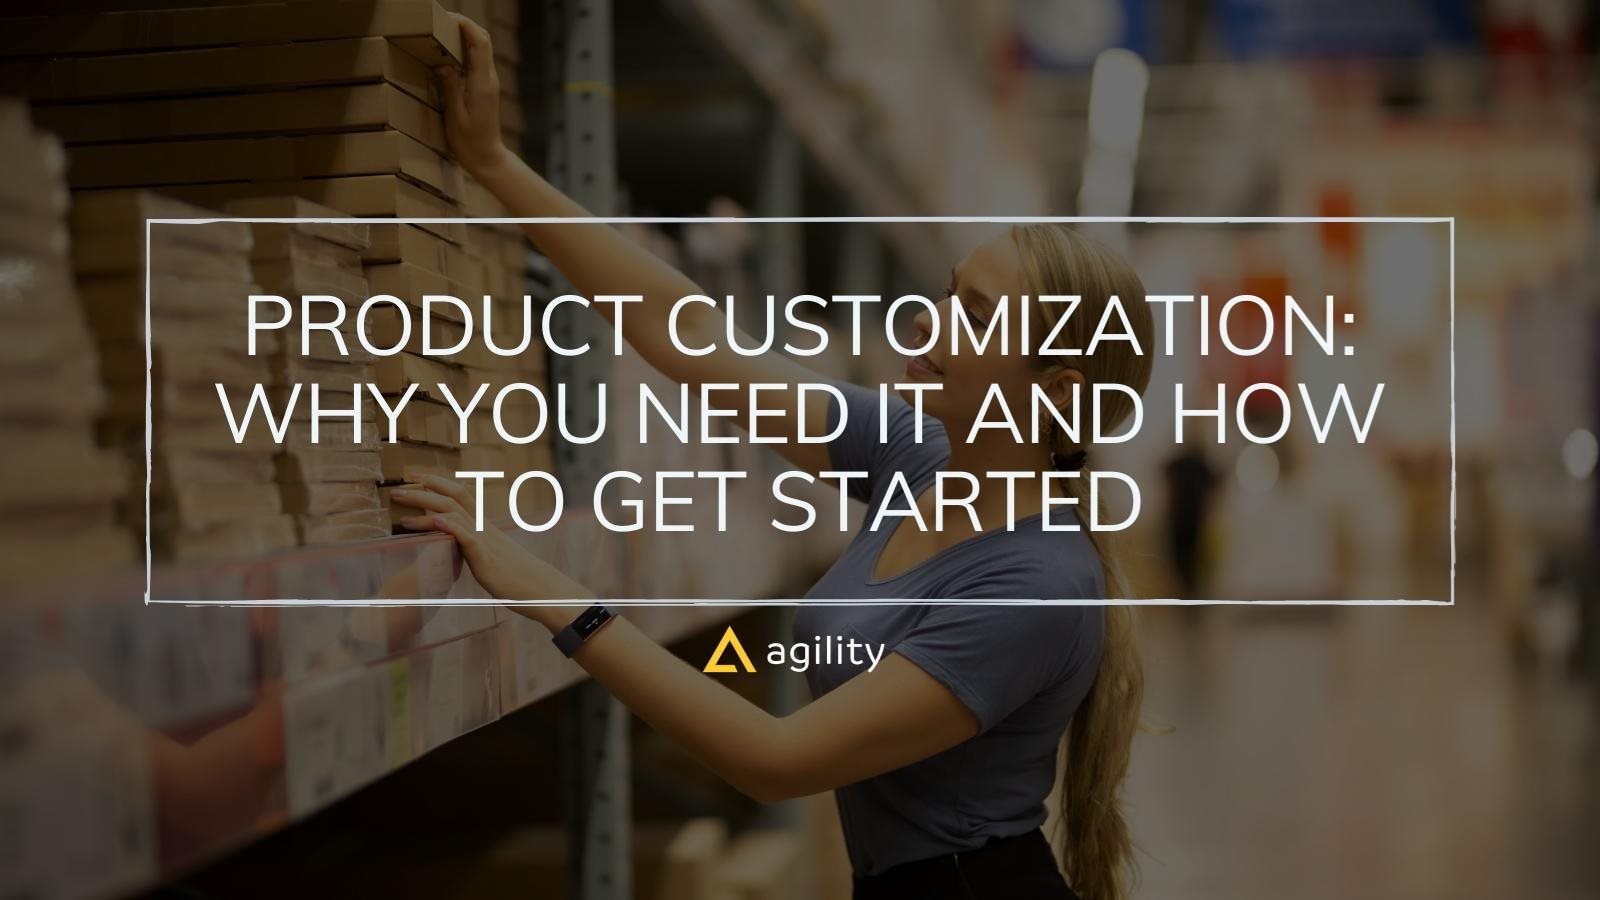 Product Customization: Why you need it and how to get started.